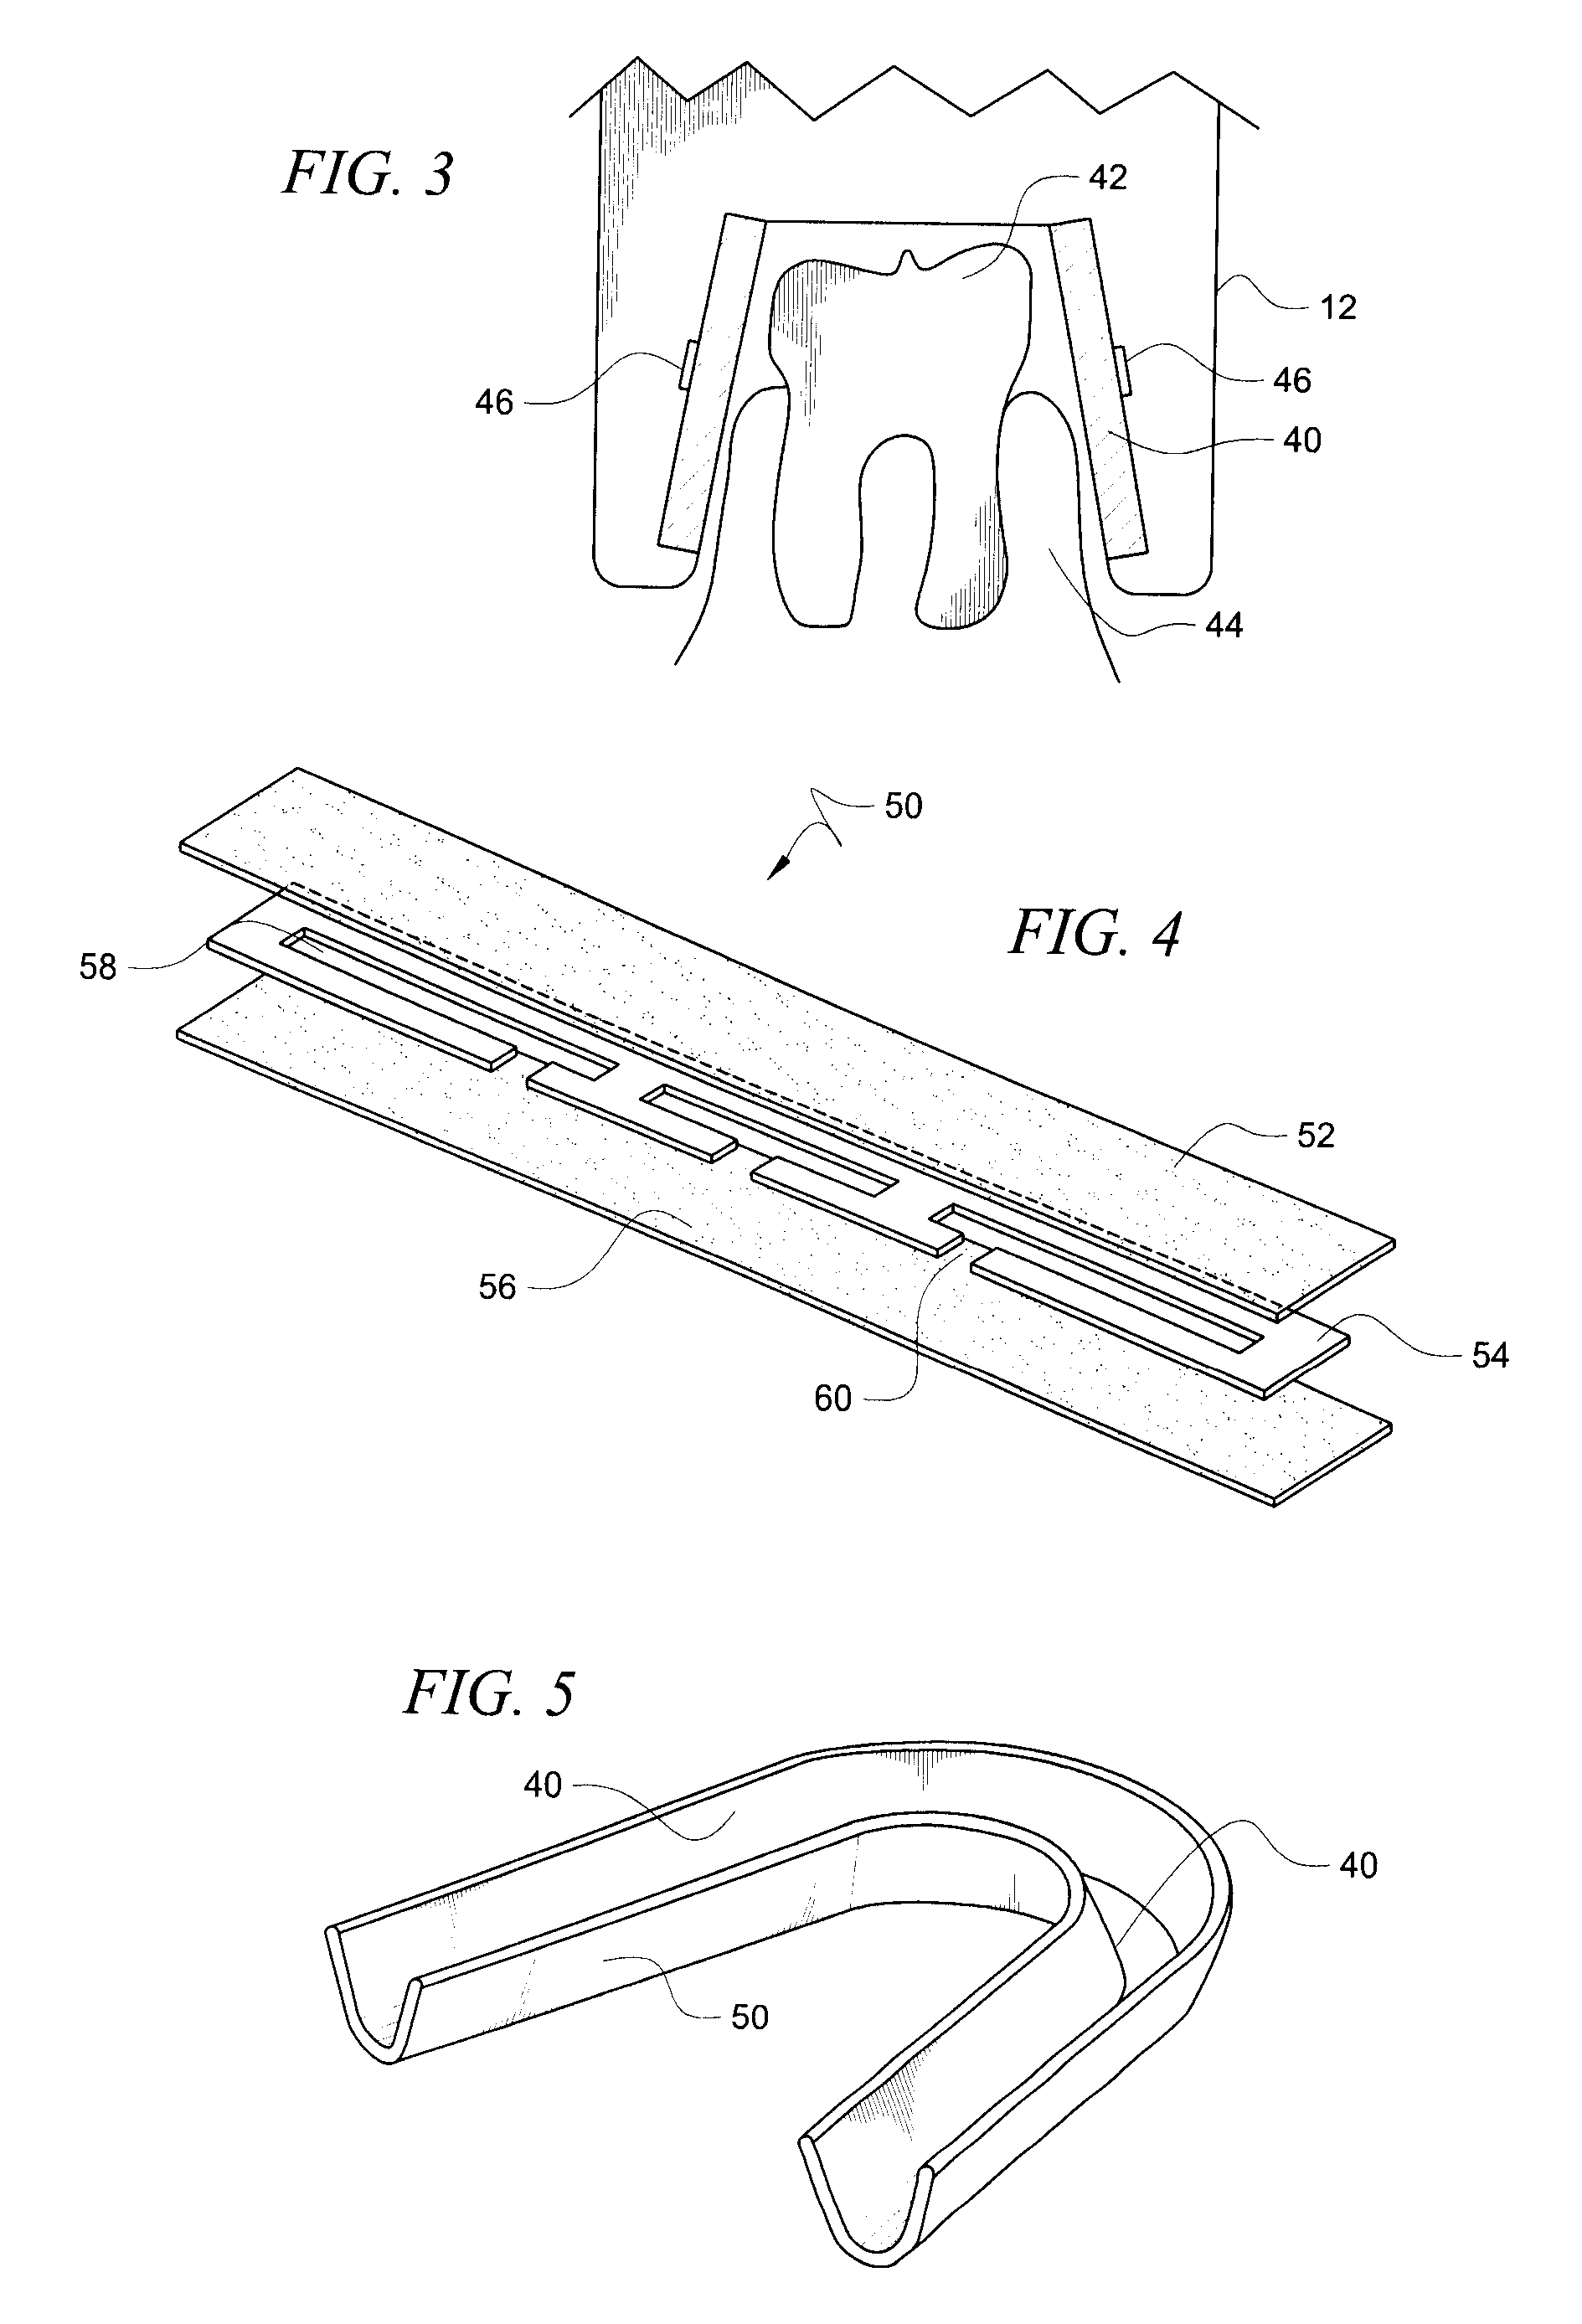 Treatment device and method for treating or preventing periodontal disease through application of heat